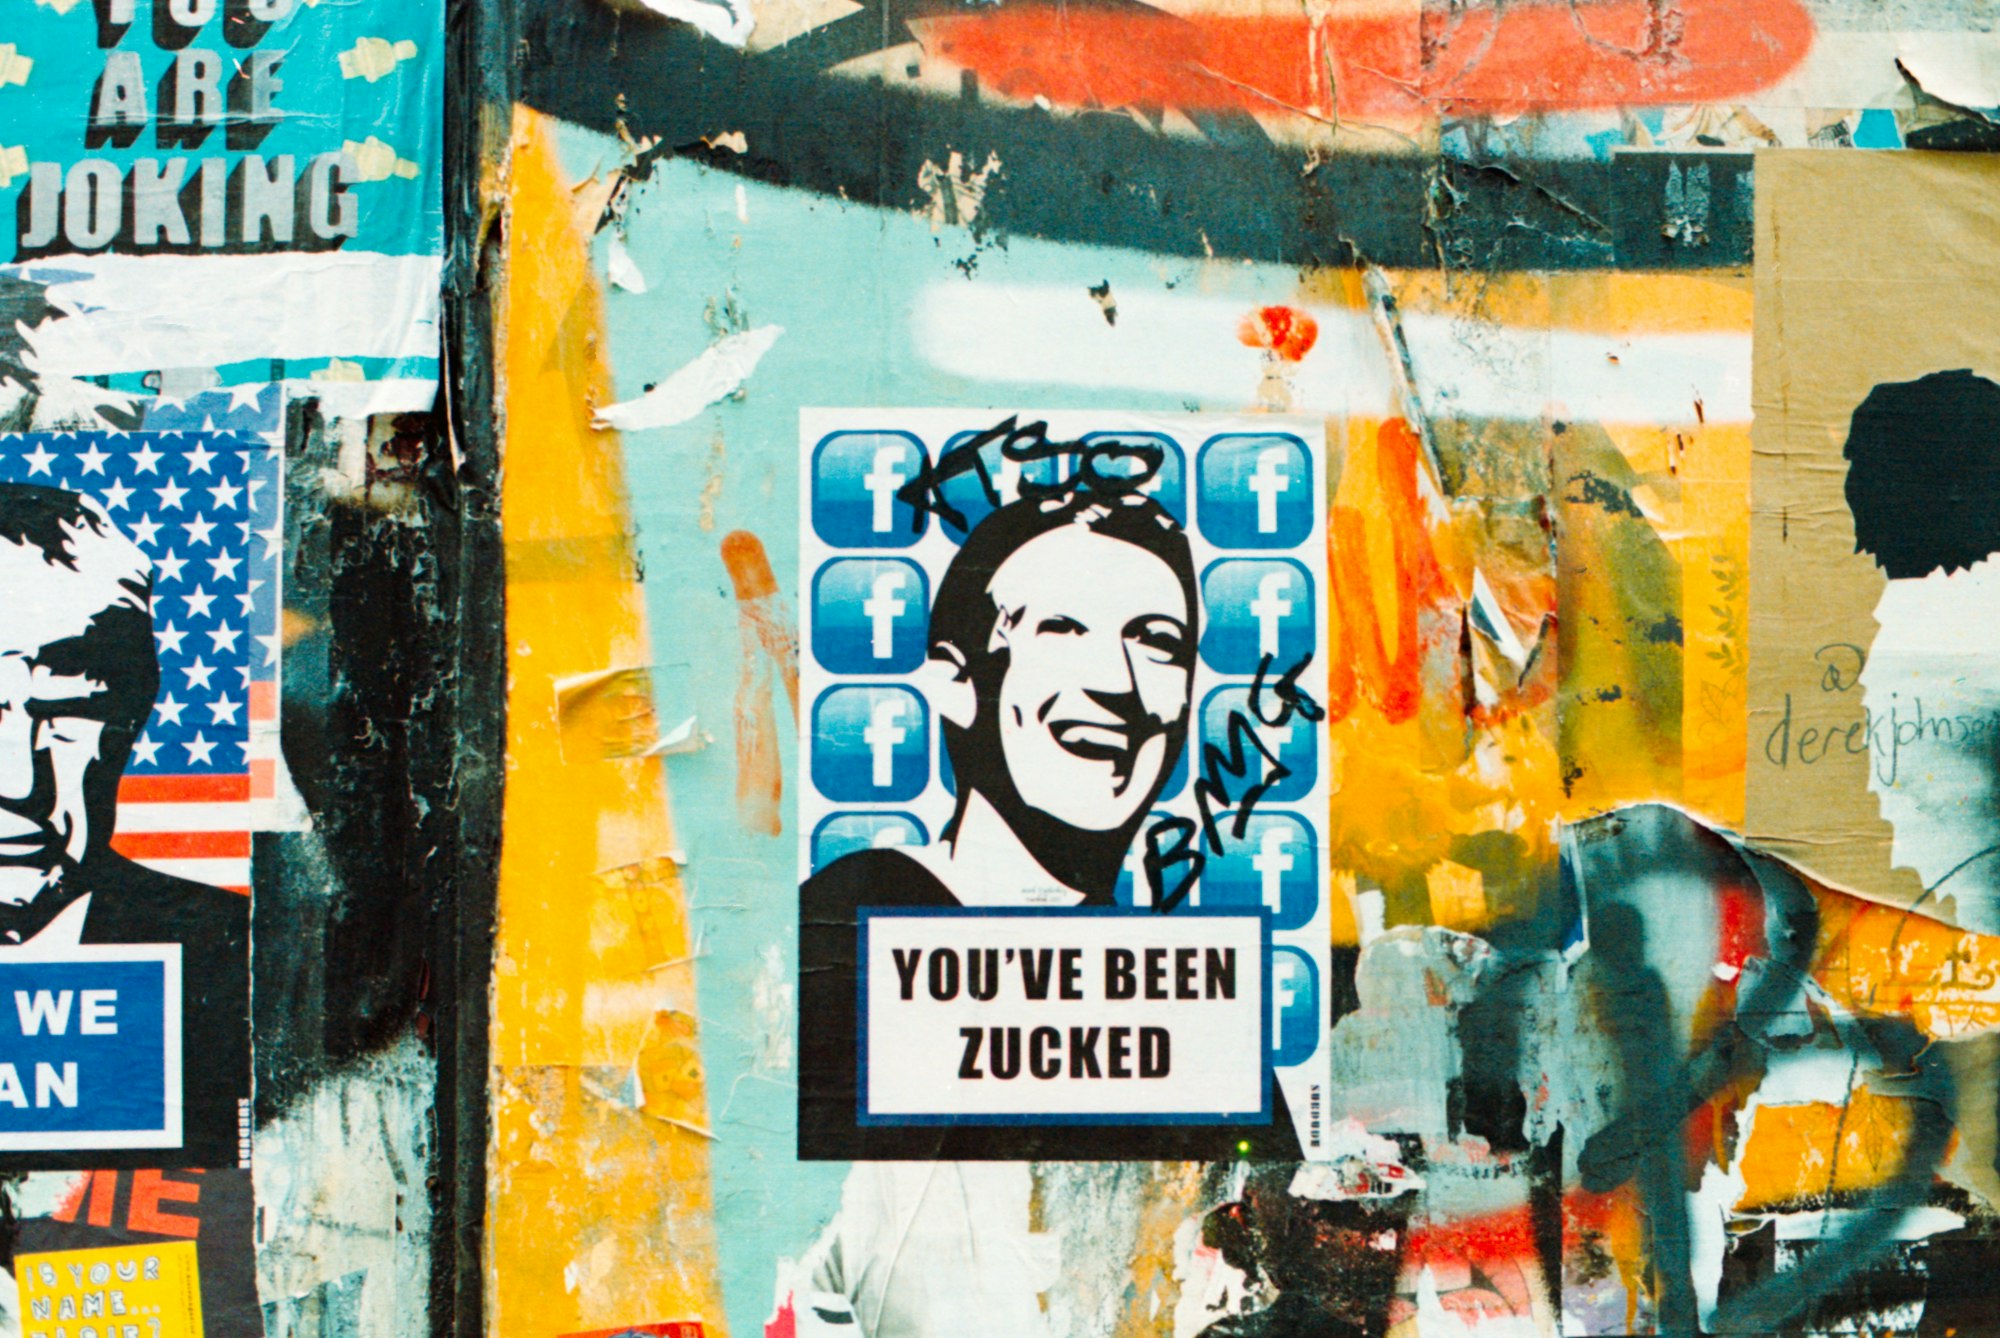 A wall of graffiti art and posters, the center one showing a picture of Mark Zuckerberg with text saying "You've been zucked."